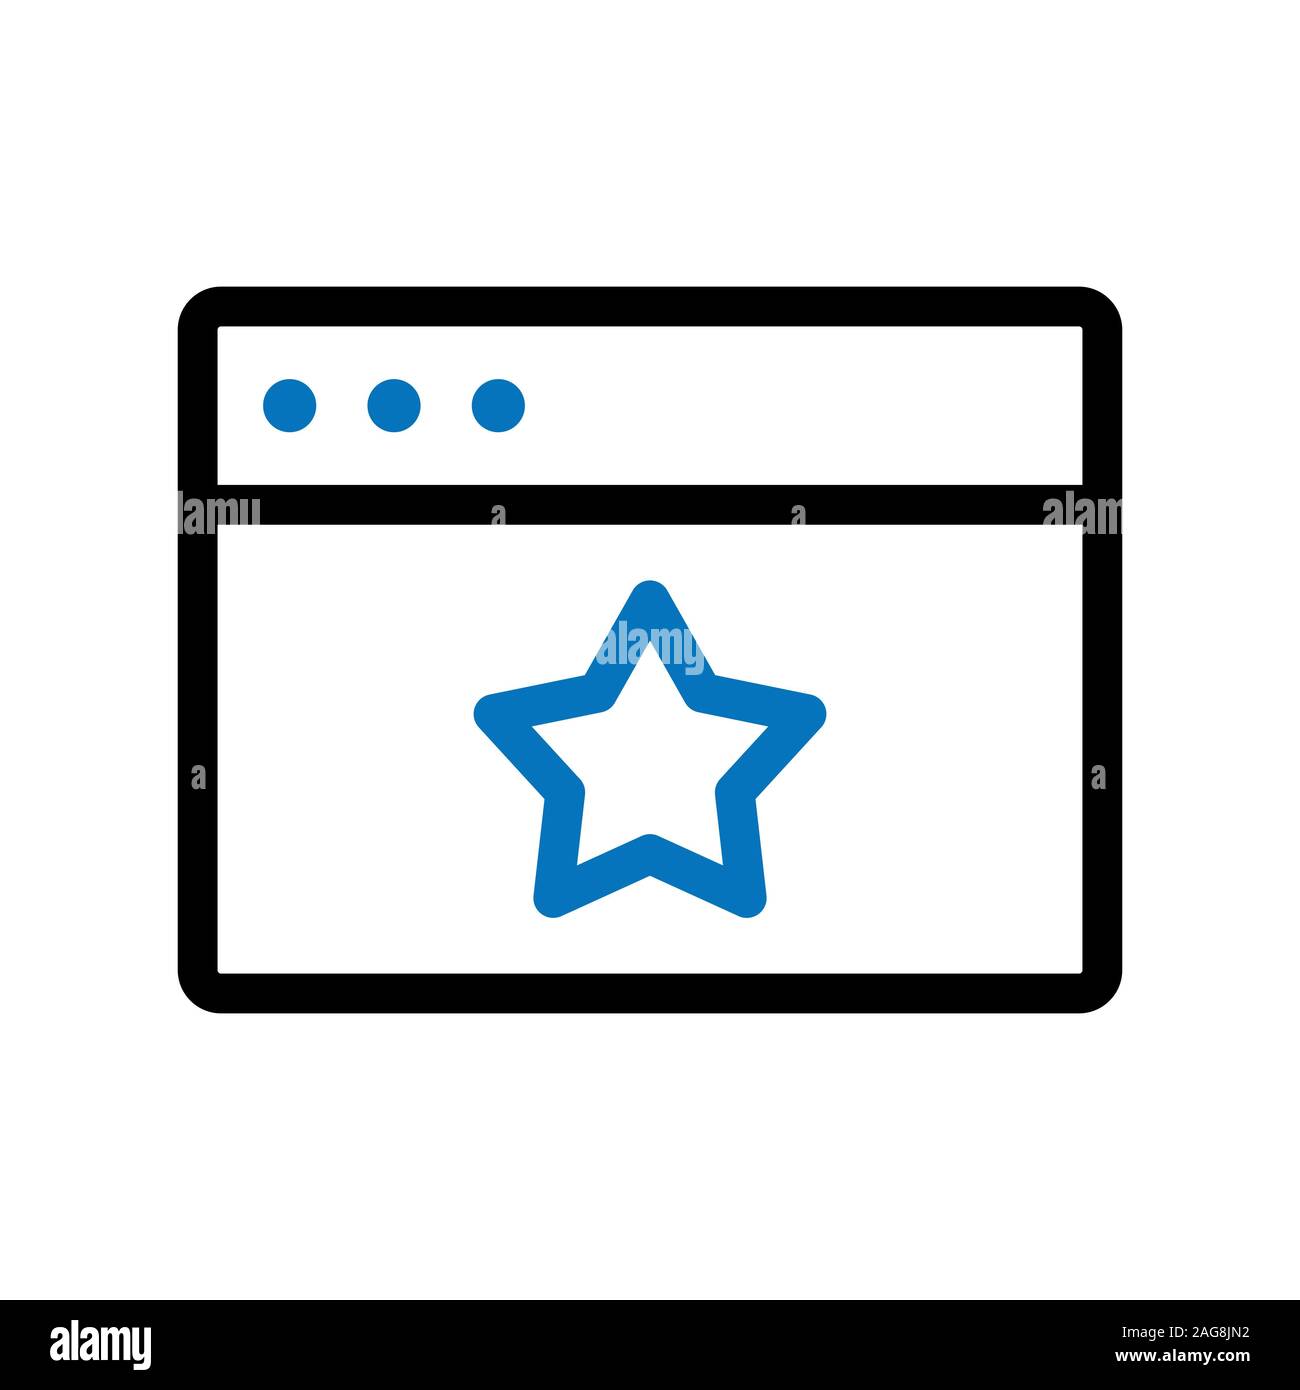 Basic UI Line icon design image. It can also be used for the user interface. Suitable for mobile apps, web apps, and print media. Stock Photo